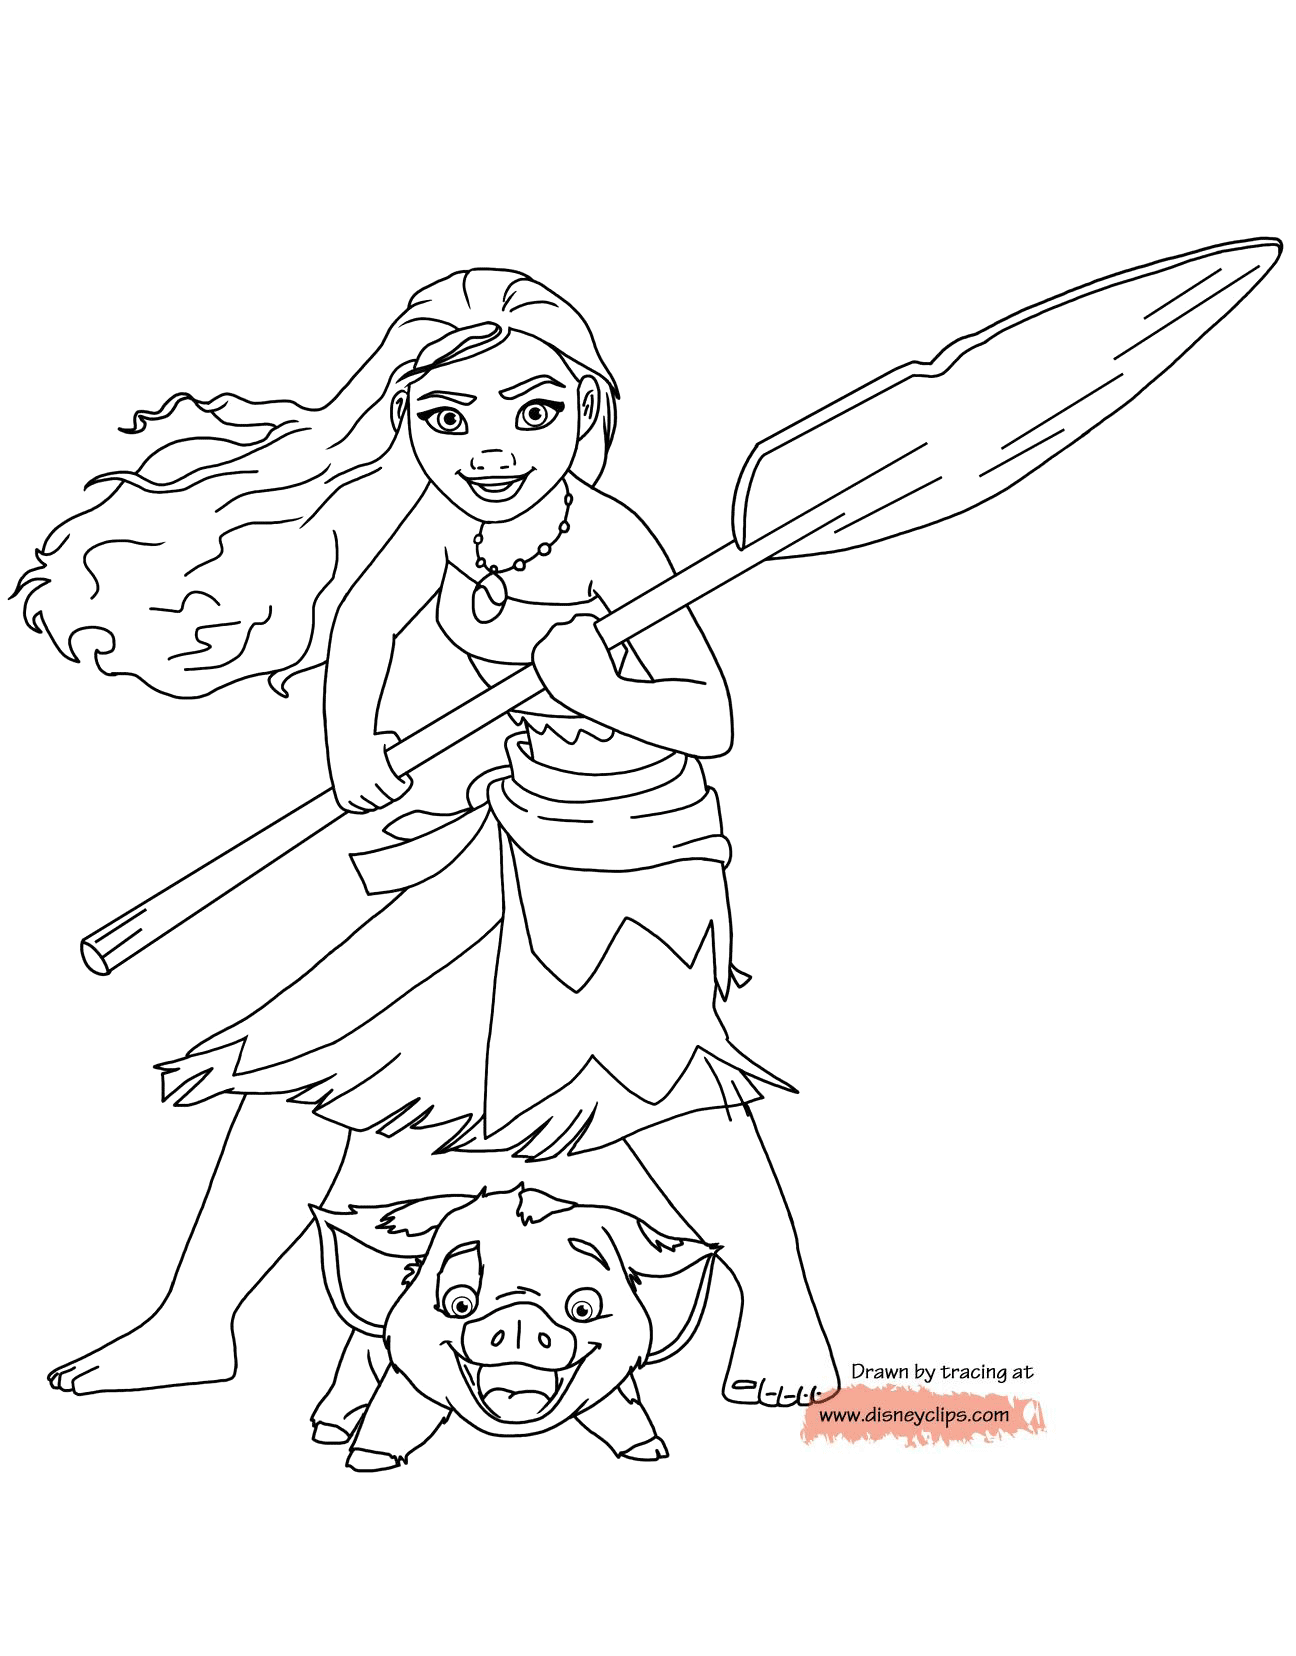 Download Disney's Moana Coloring Pages | Disneyclips.com